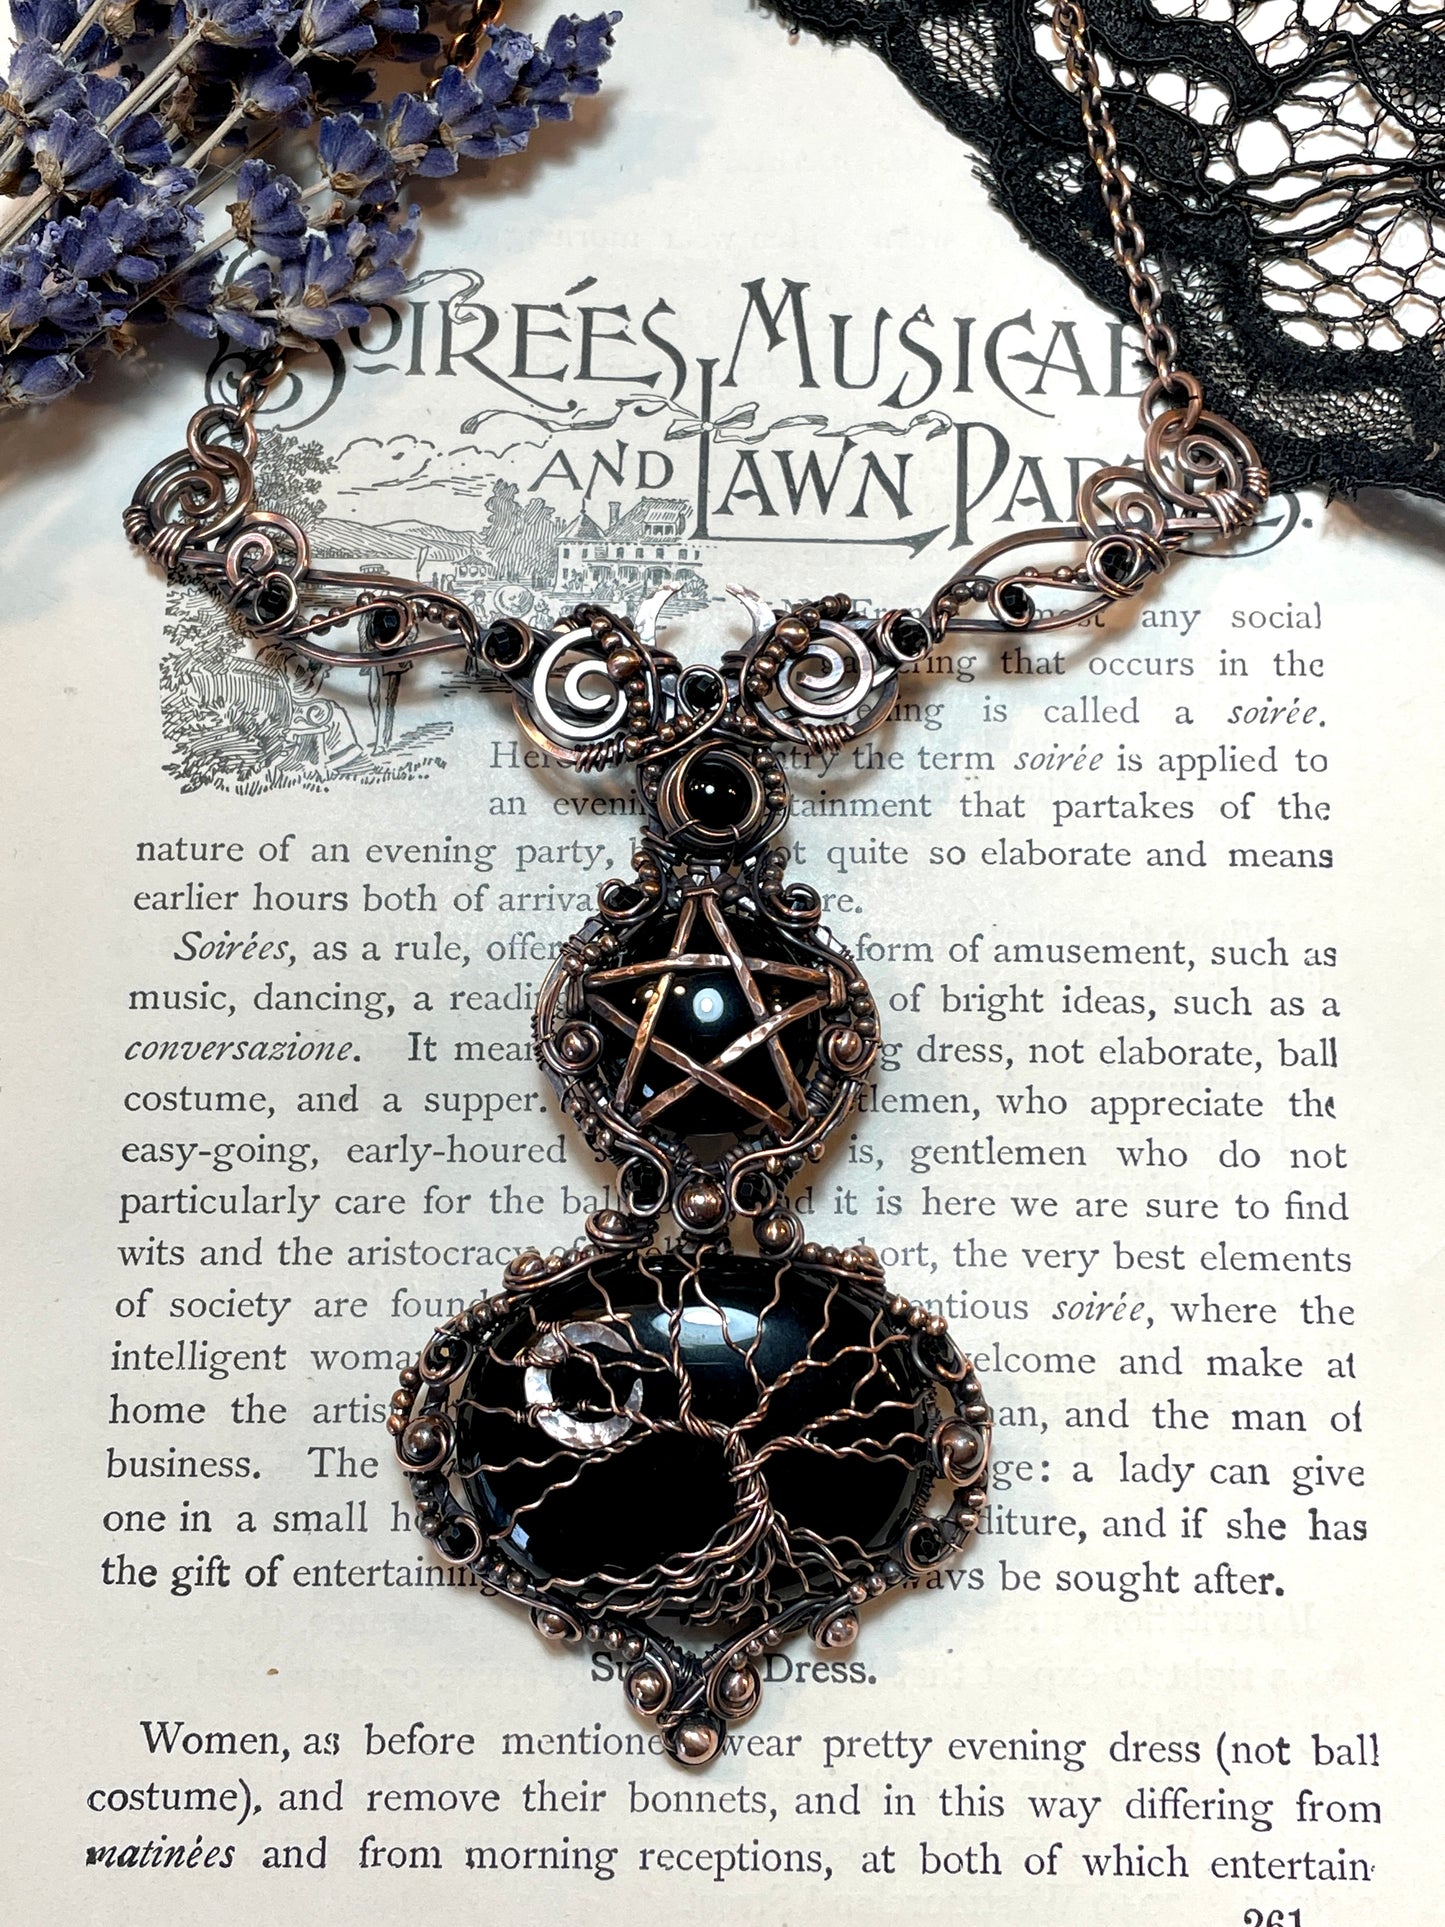 Black Onyx Tree of Life, Pentacle Collar in Copper